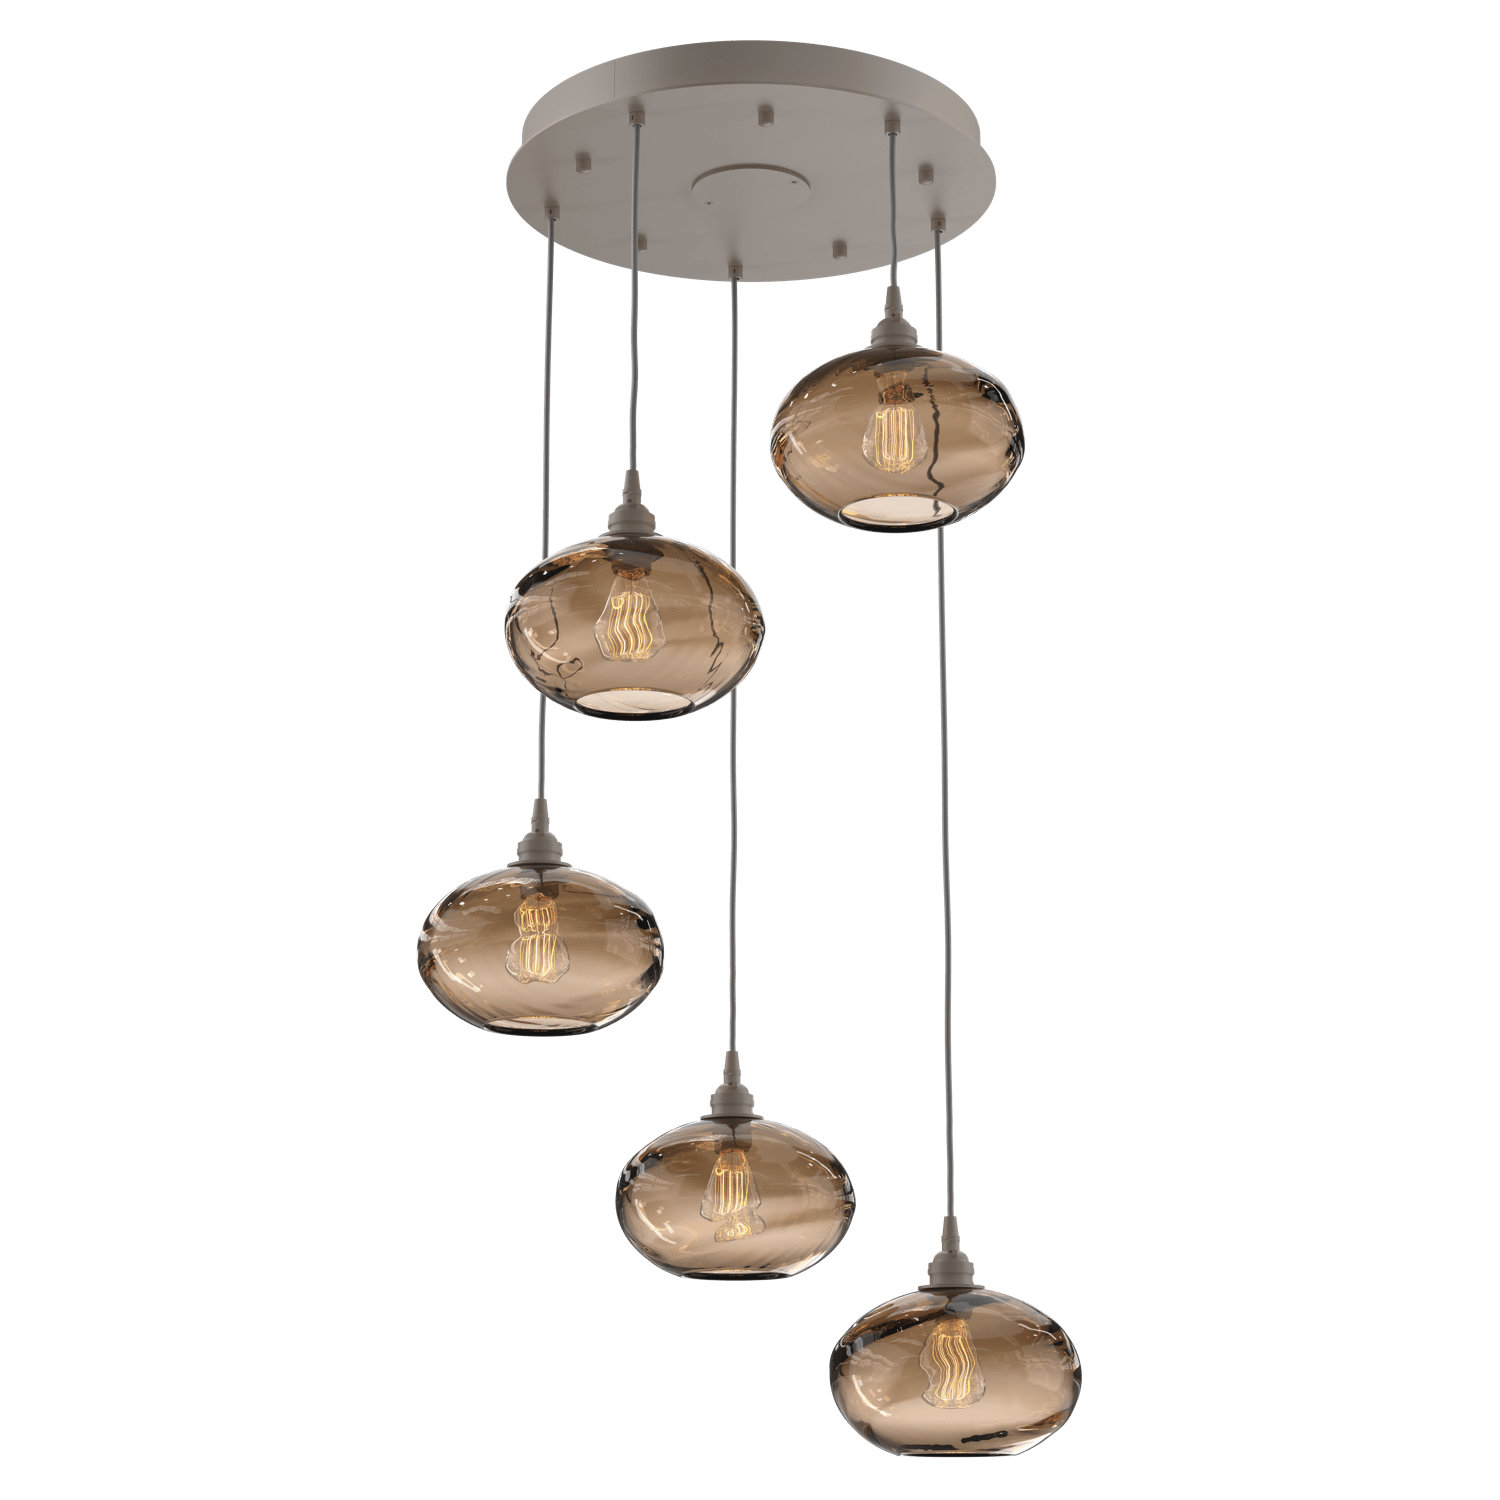 CHB0036-05-BS-OB-Hammerton-Studio-Optic-Blown-Glass-Coppa-5-light-round-pendant-chandelier-with-metallic-beige-silver-finish-and-optic-bronze-blown-glass-shades-and-incandescent-lamping